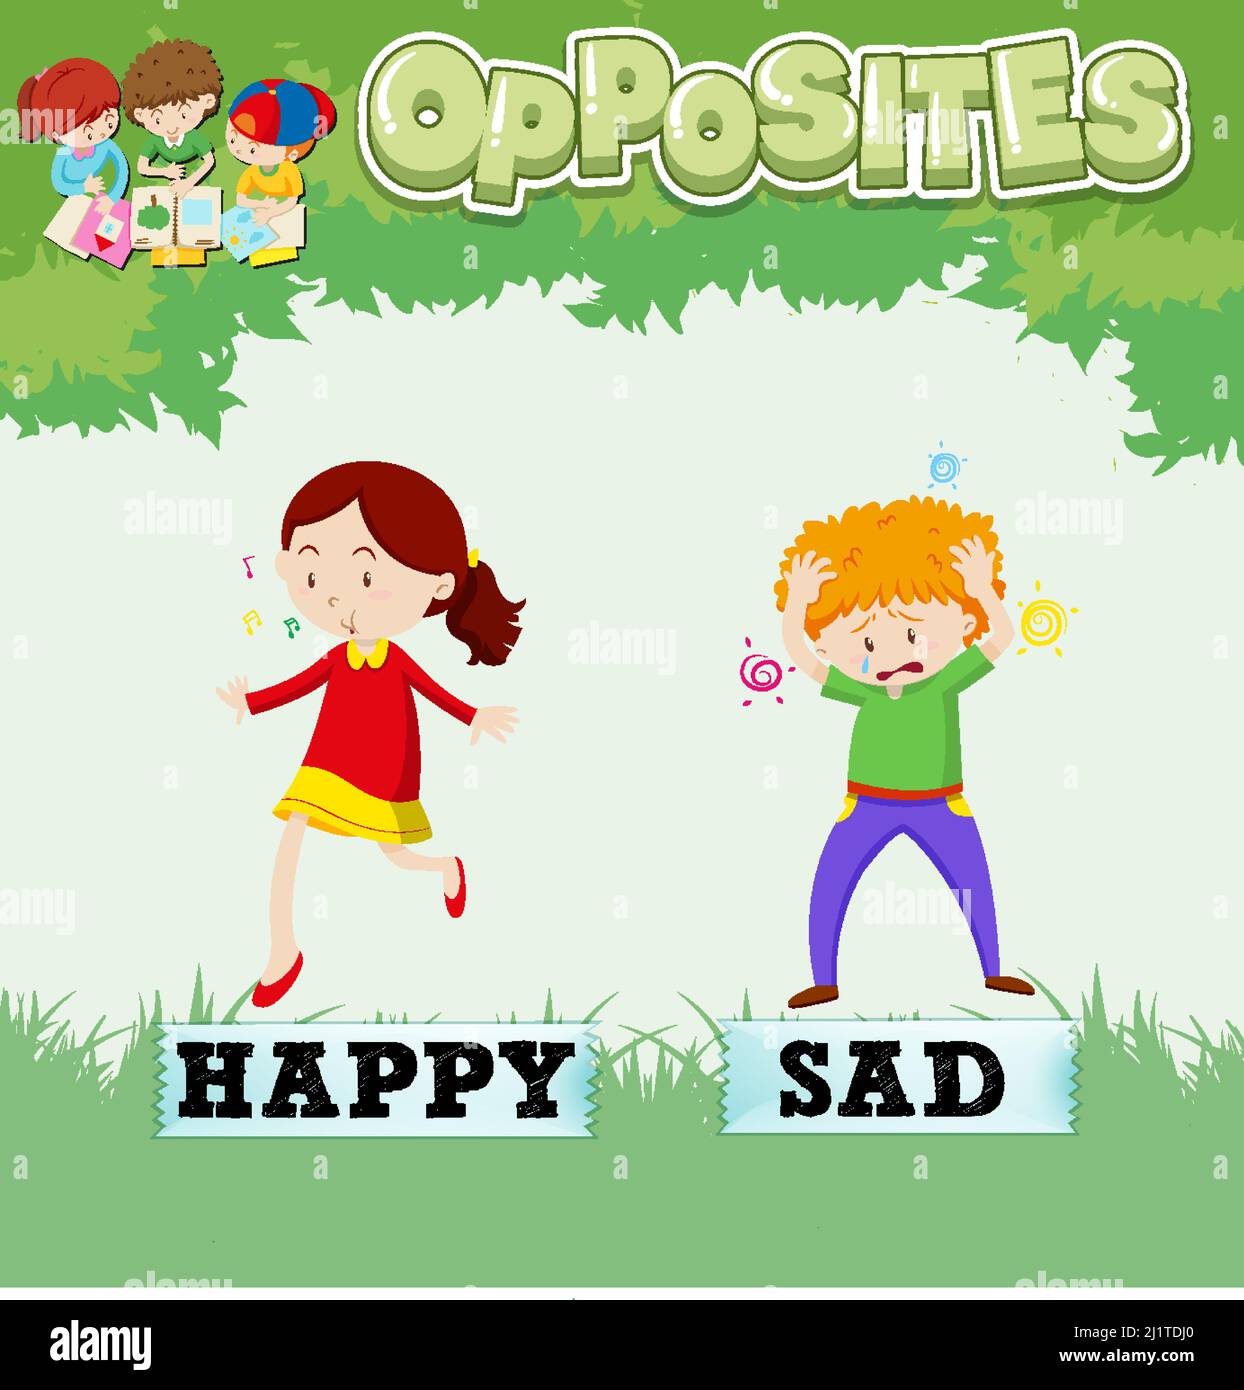 Opposite words for happy and sad  illustration Stock Vector